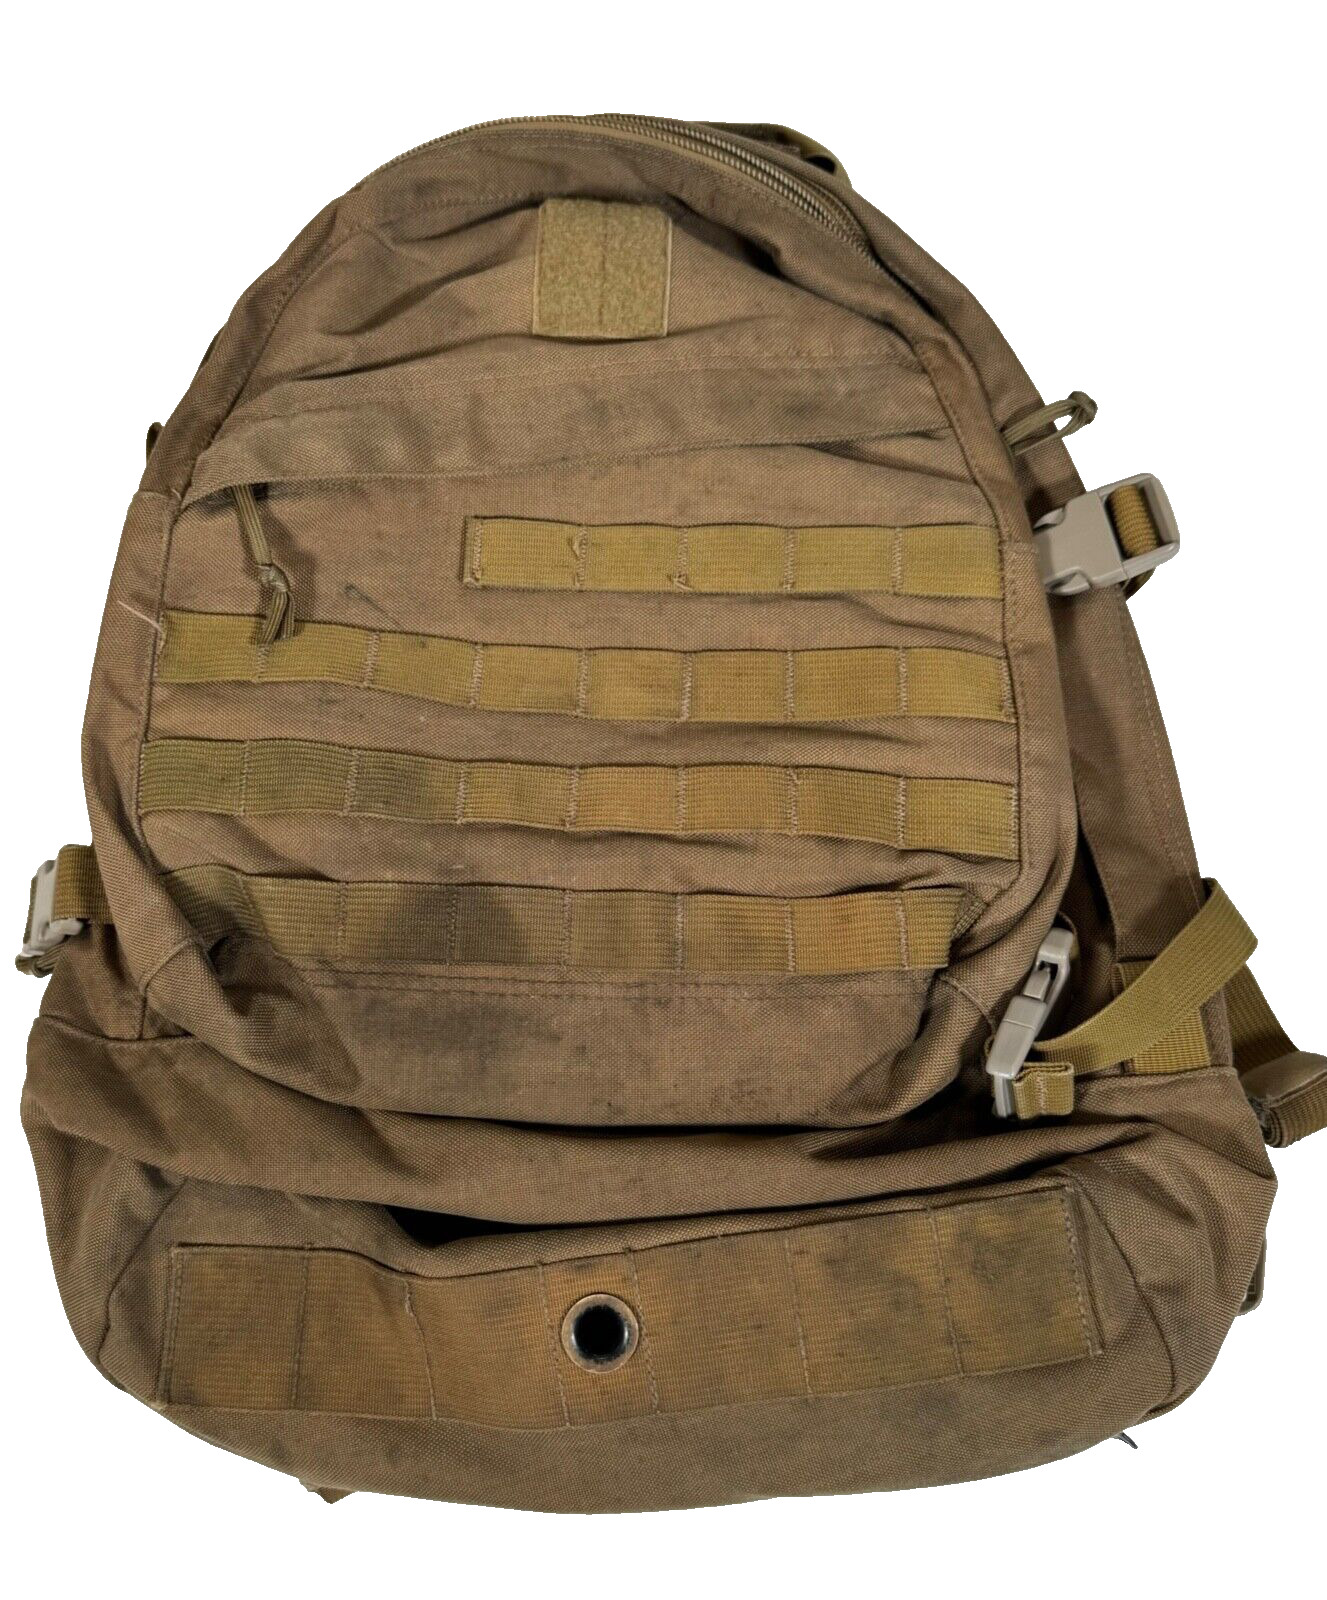 London Bridge Trading LBT-1476A Three 3 Day Assault Pack Backpack Coyote Tan